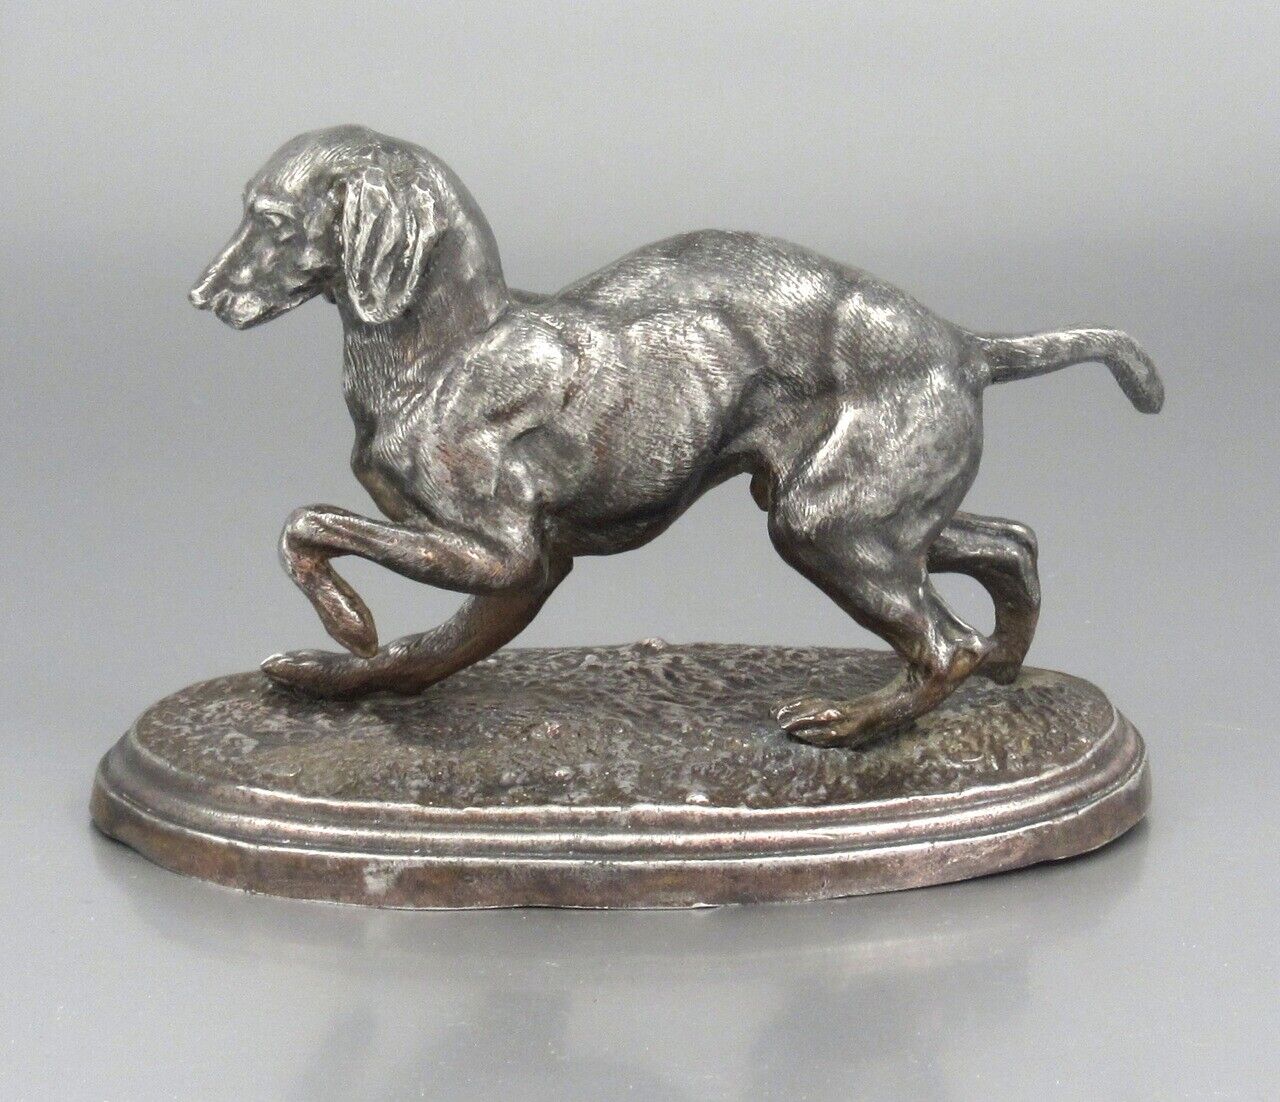 Antique French Patinated Silvered Spelter Sculpture Figurine Dog